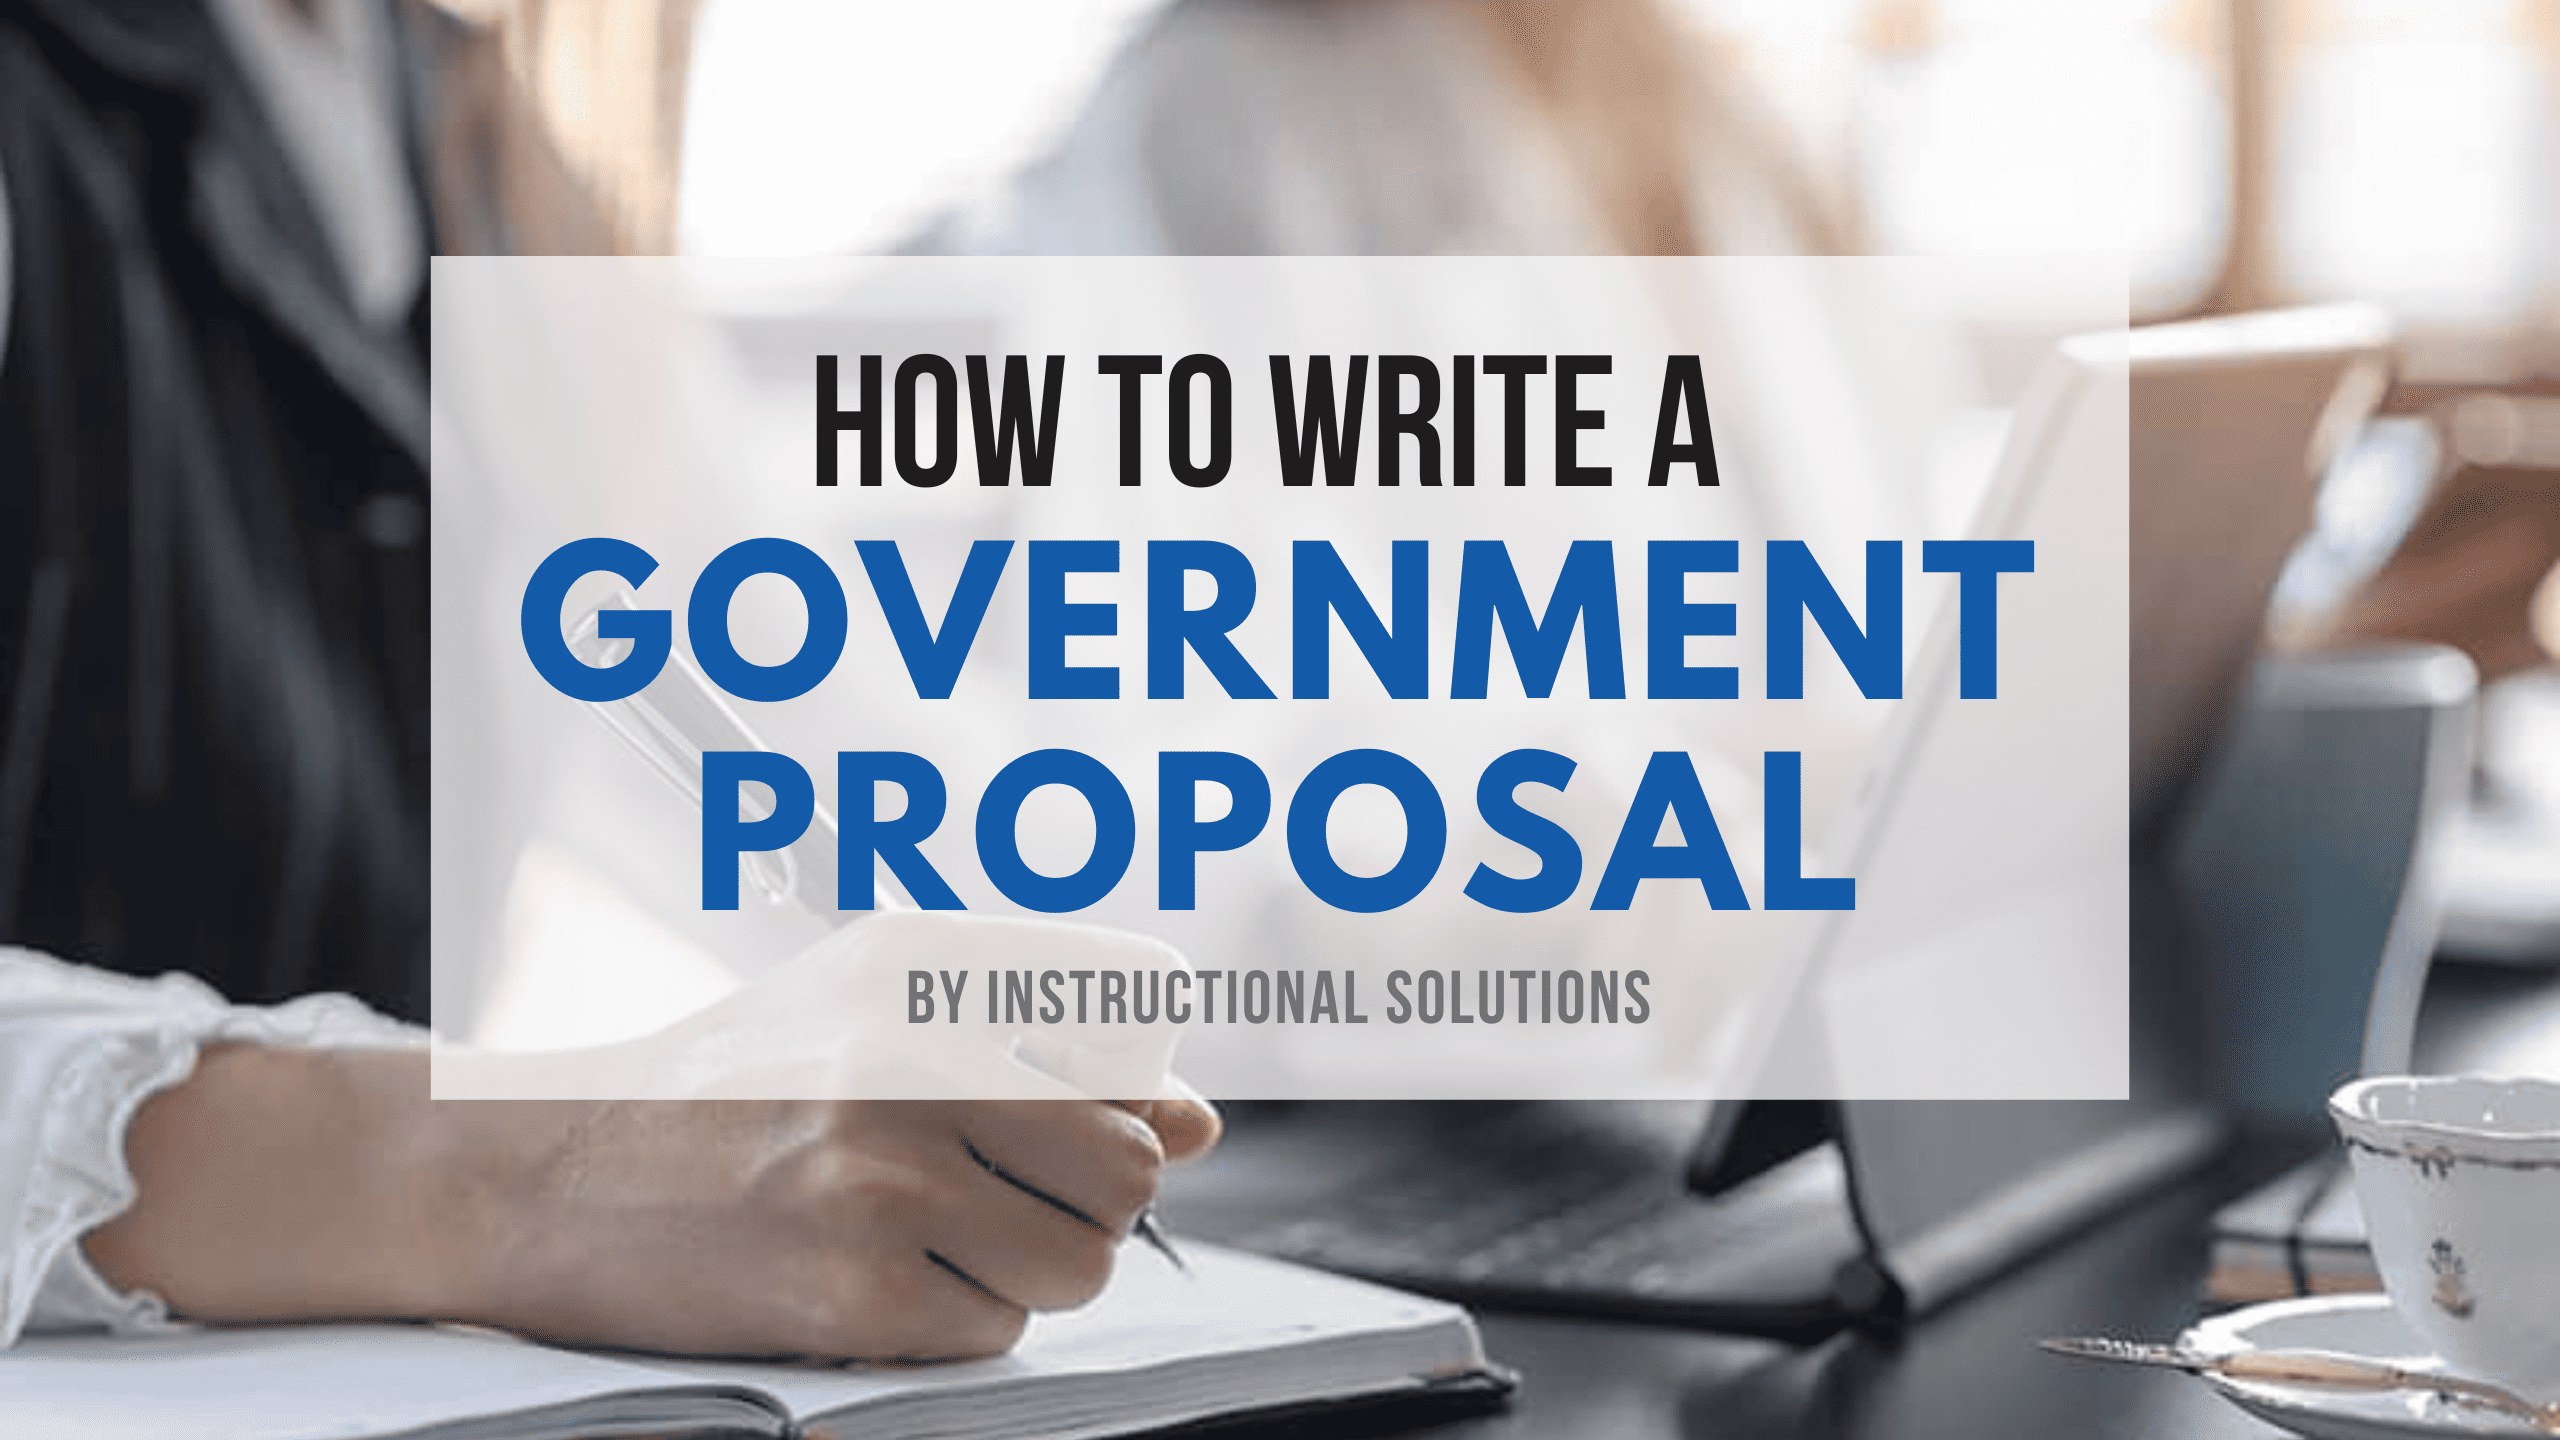 How to Write a Government Proposal